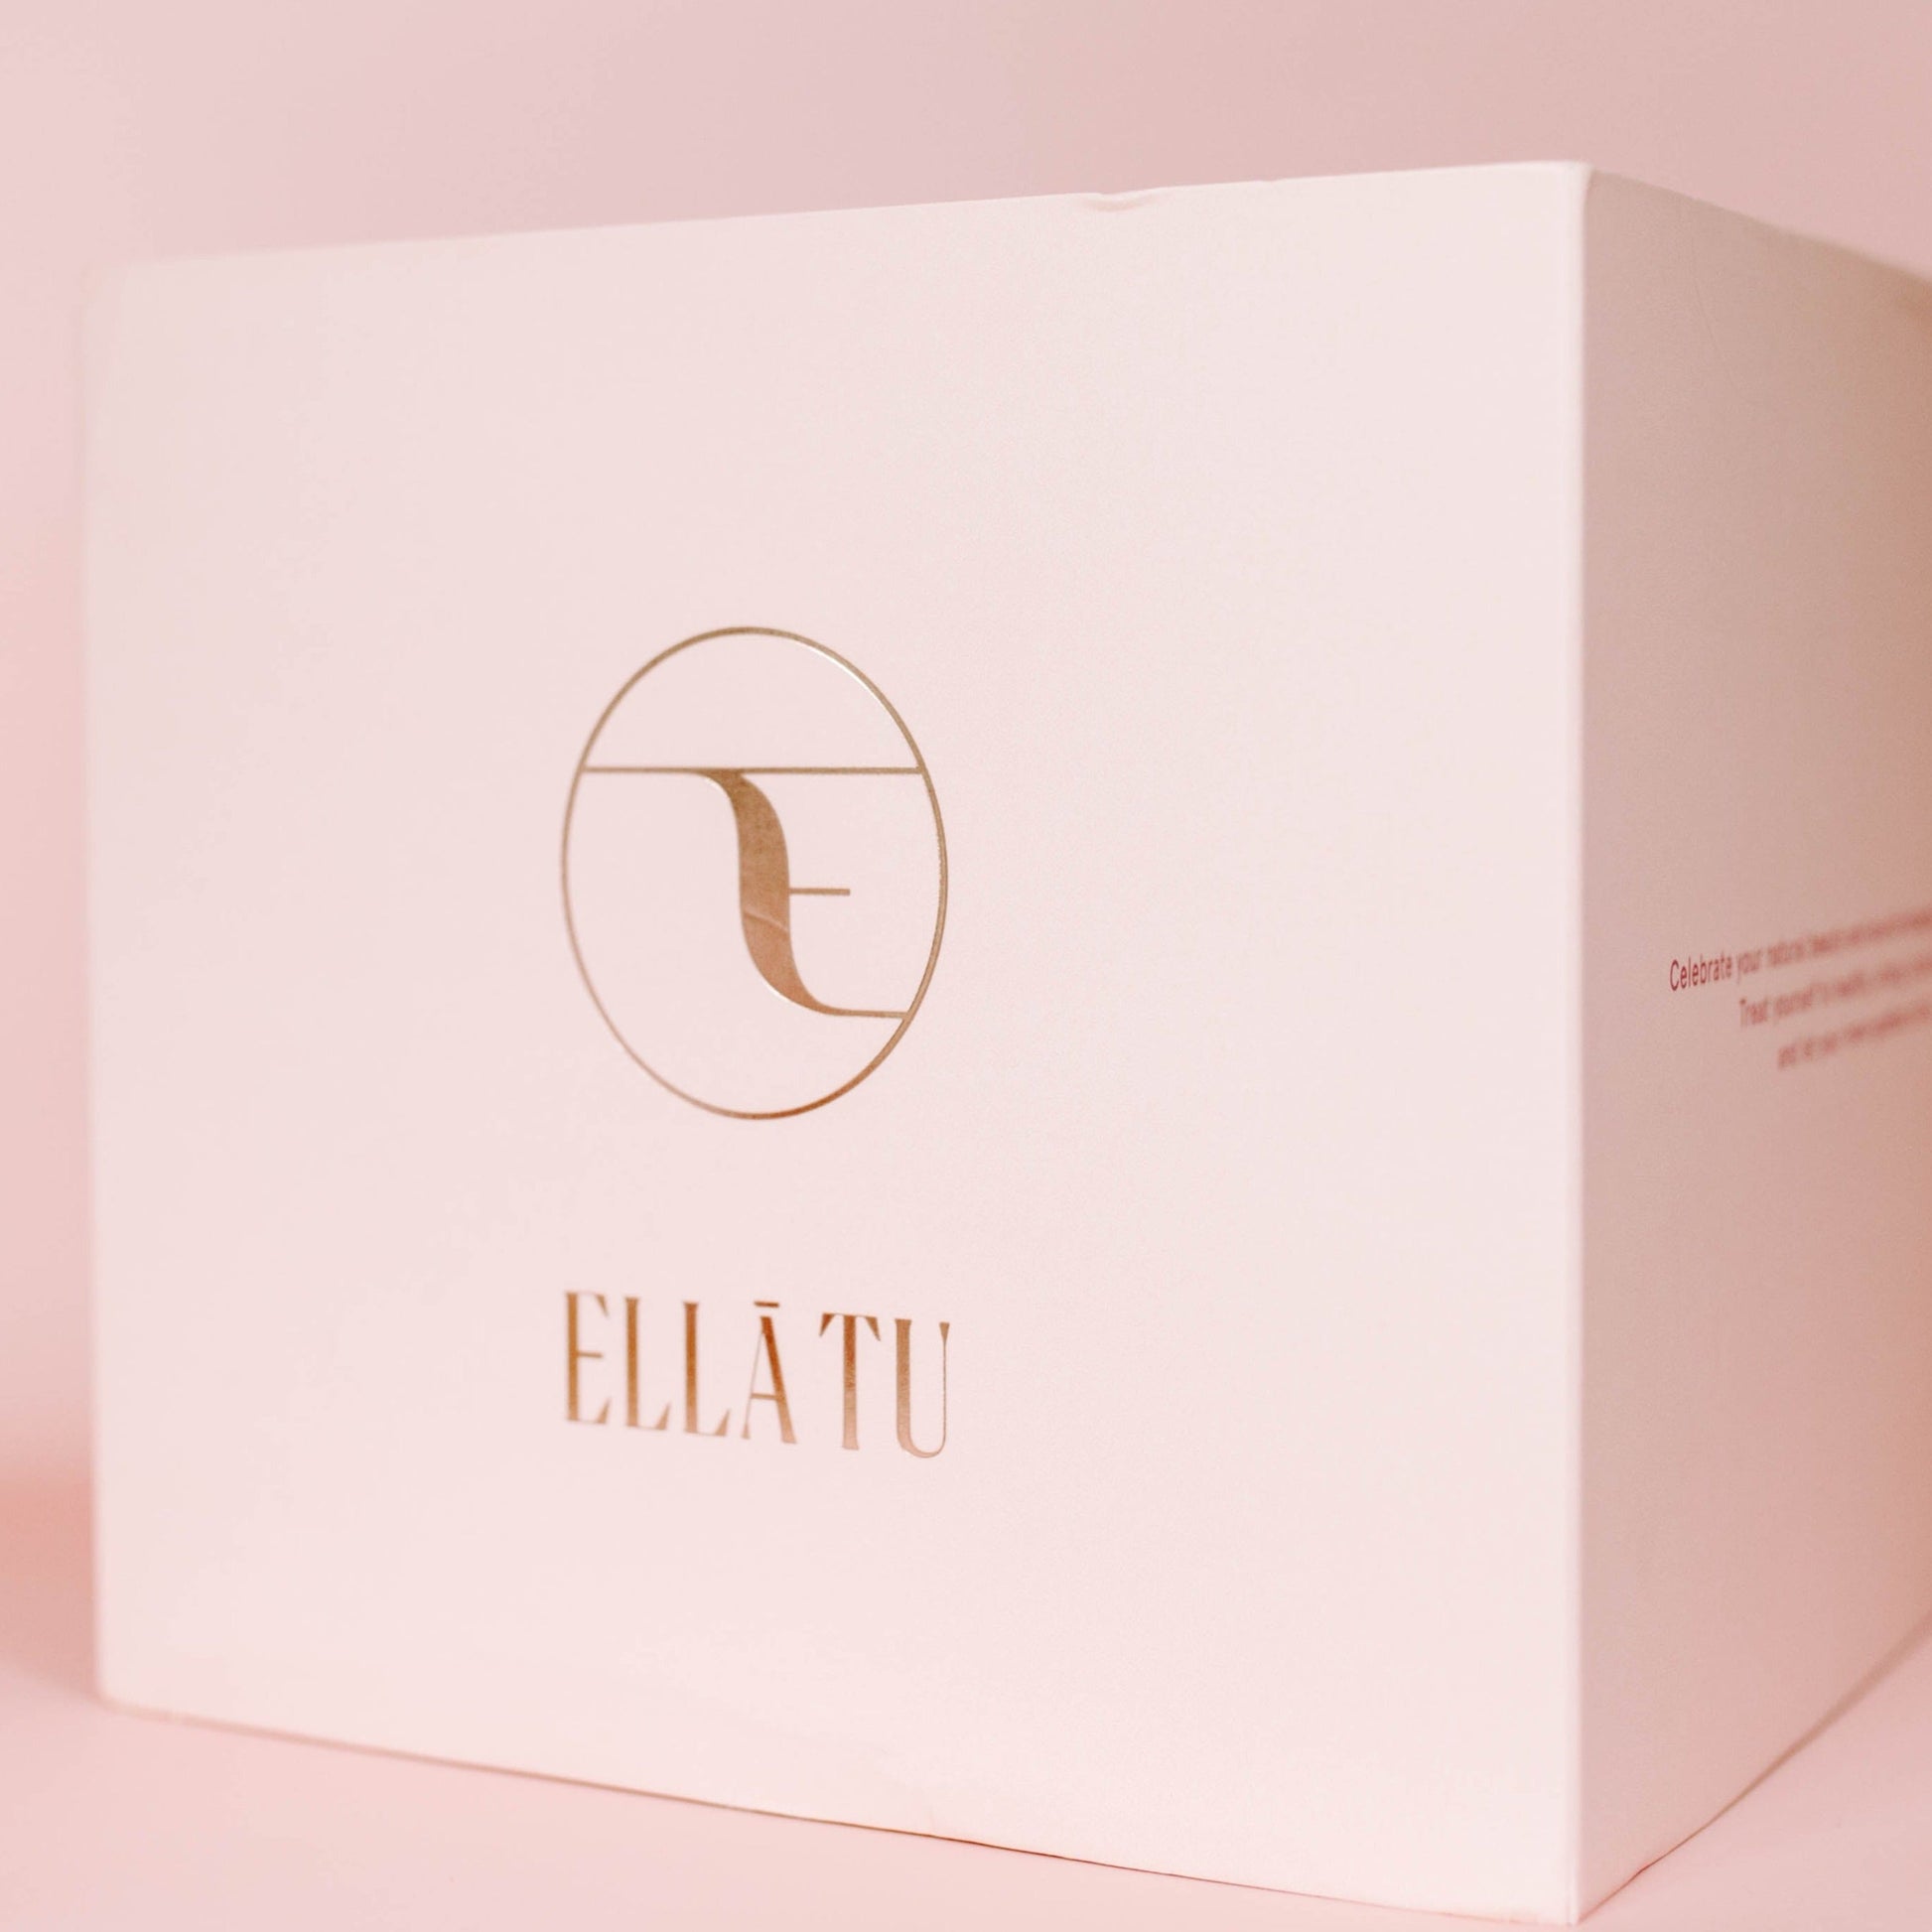 The beautiful packaging for the Ellatu Silky Touch Goddess Hair Care Kit / Routine. Full kit with shampoo, conditioner, hair mask, hair serum and hair fragrance / perfume. Everything you need to treat dry, brittle, dull, damaged, color treated, chemically treated hair. 